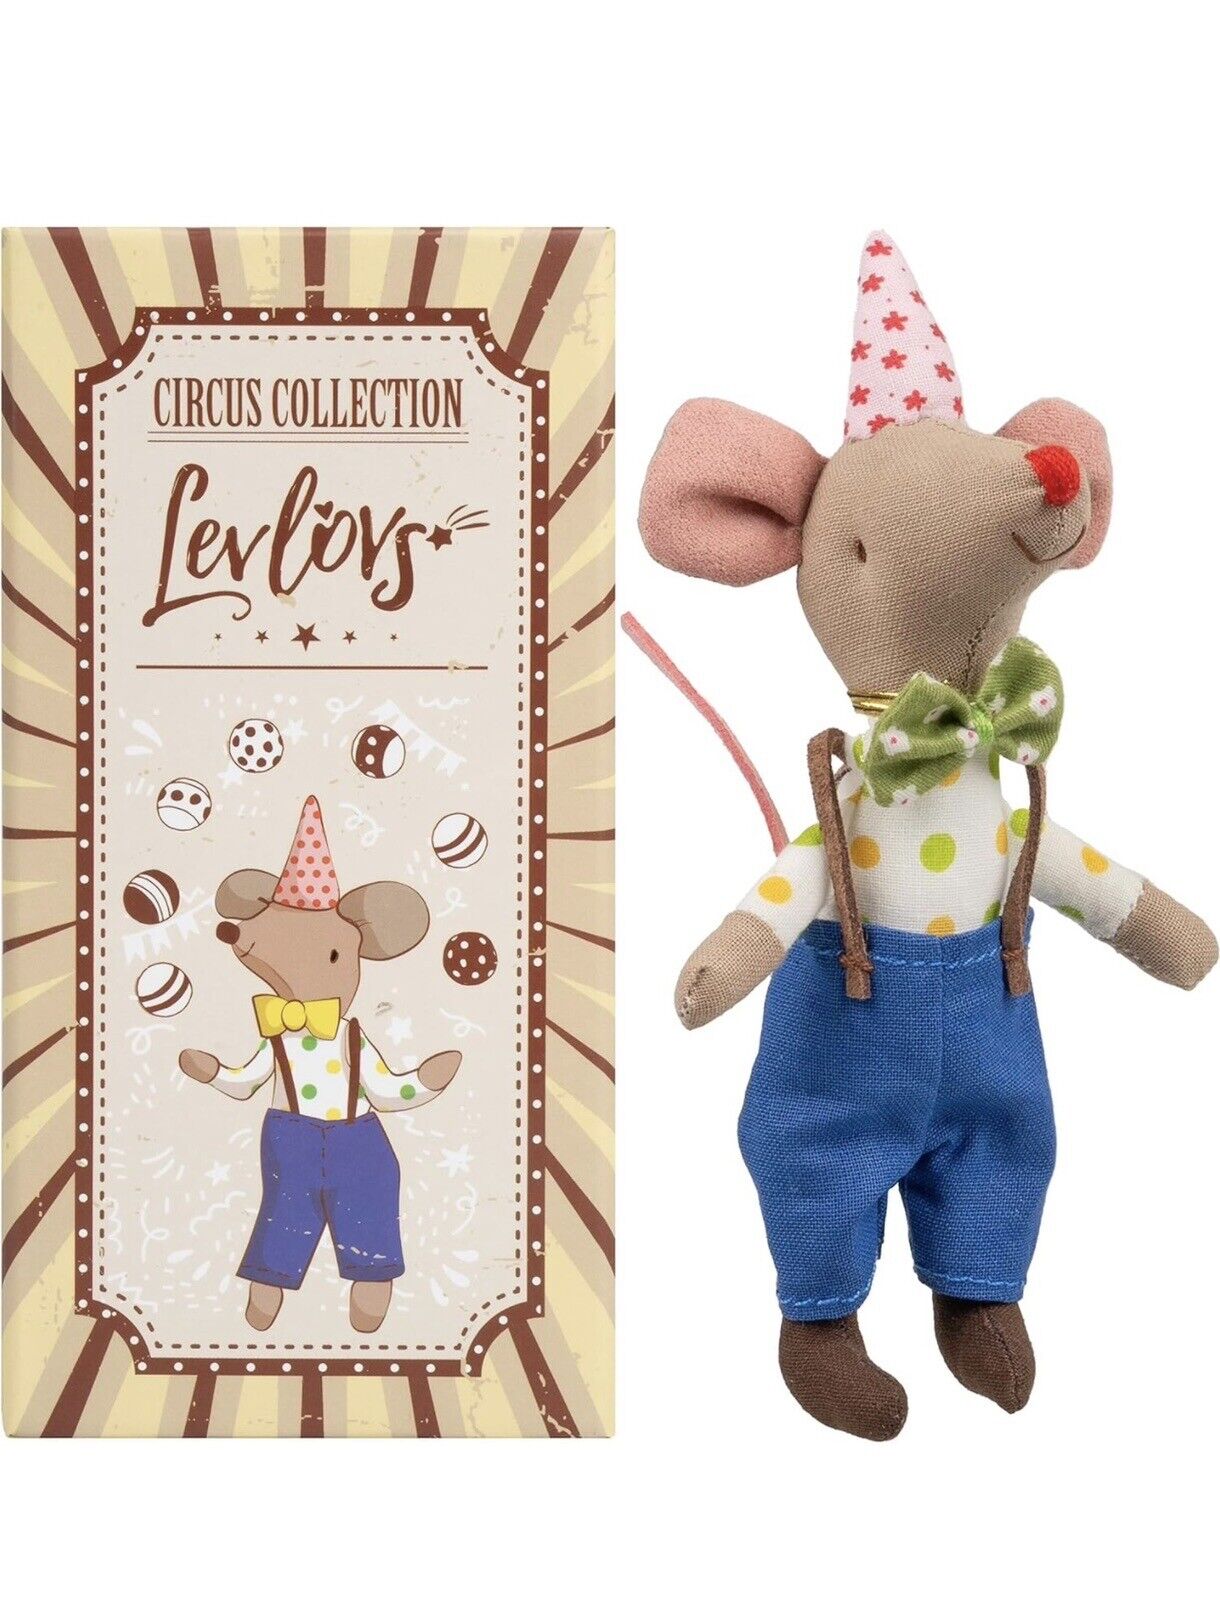 Levlovs Mice. Circus Mouse